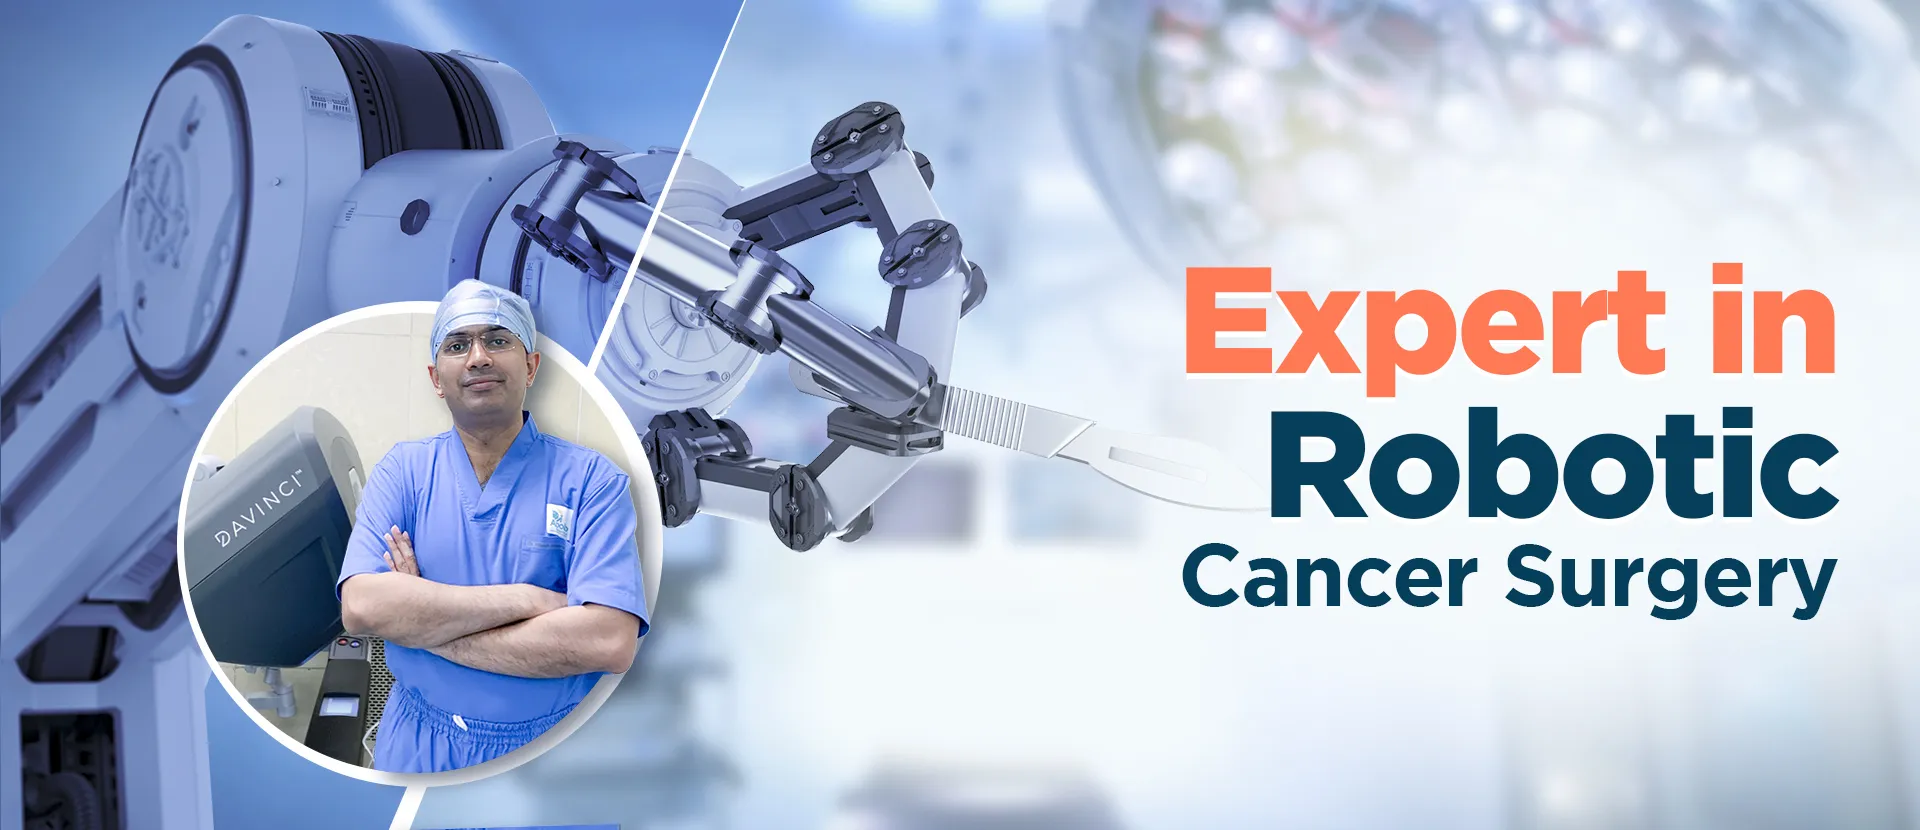 Best robotic cancer surgery and robotic surgeon in India